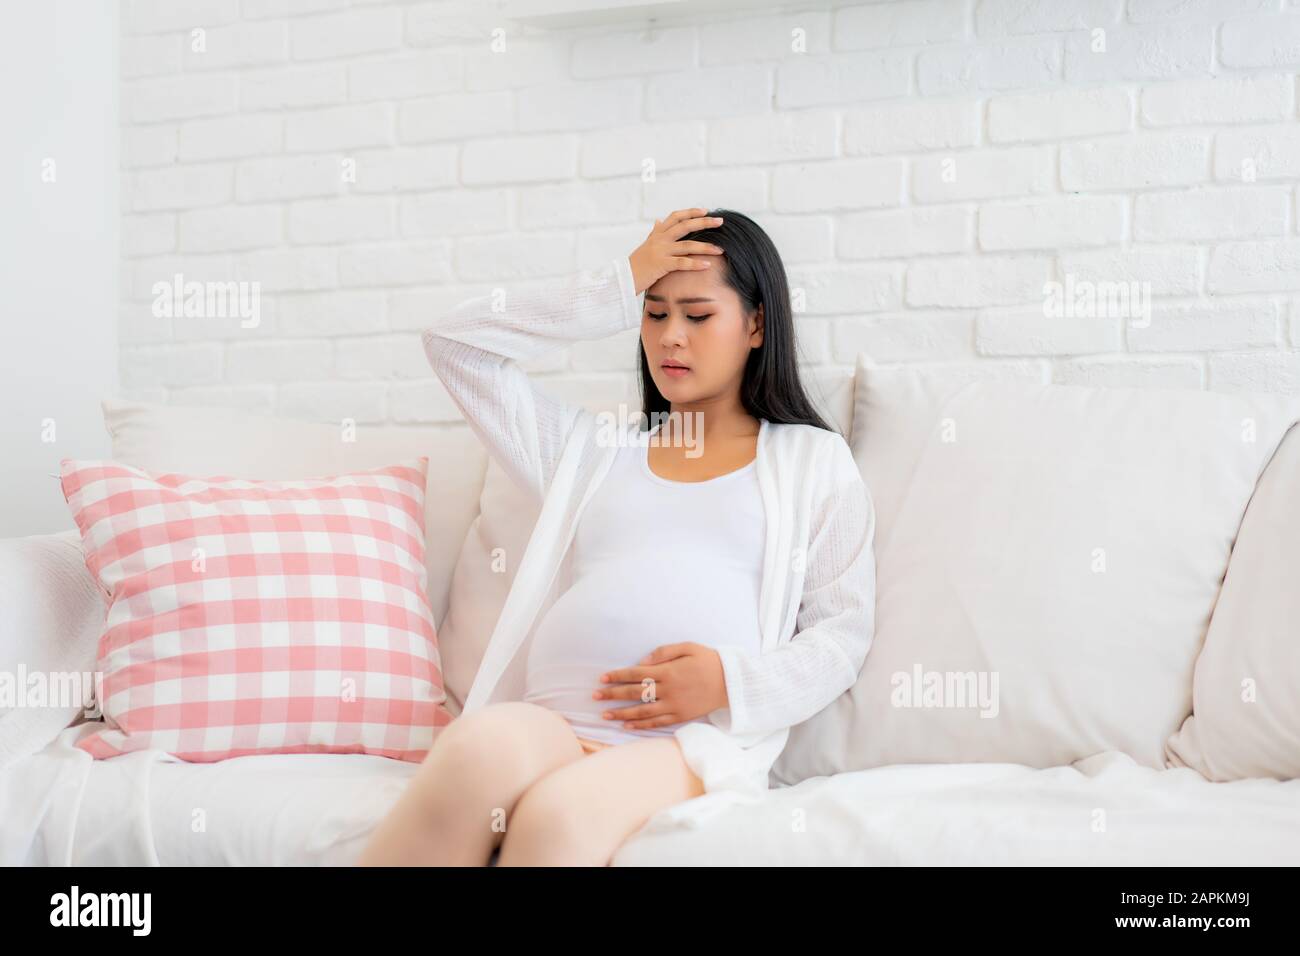 Young pregnant woman with headache sitting on sofa in living room at house. Pregnancy symptoms, expectation, parenthood concept, copy space. Stock Photo